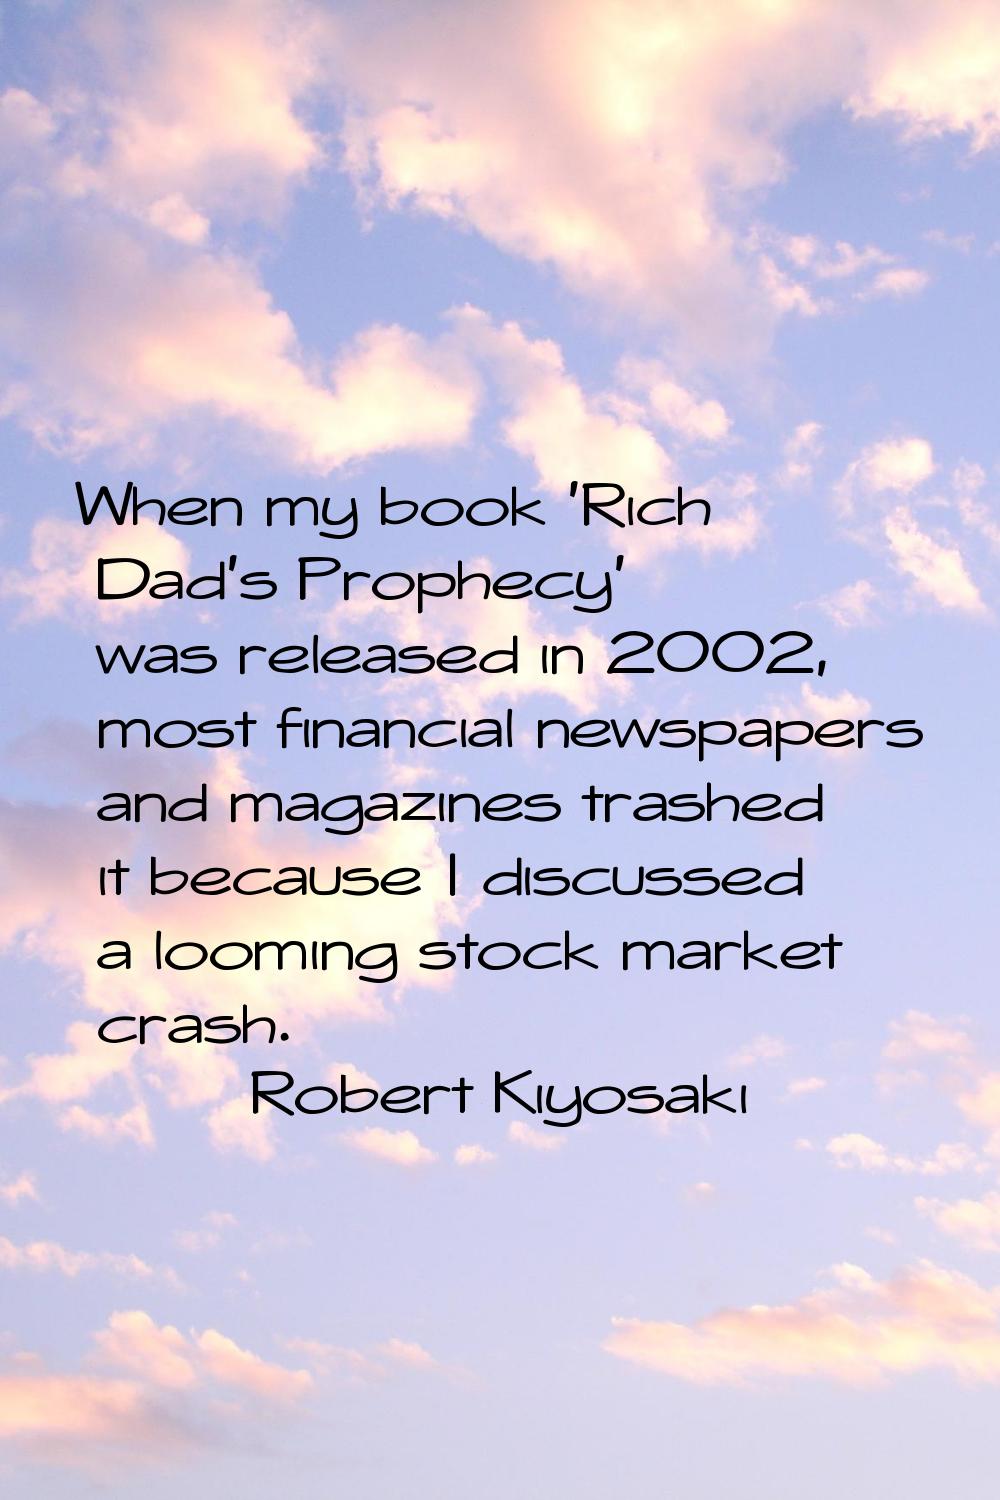 When my book 'Rich Dad's Prophecy' was released in 2002, most financial newspapers and magazines tr